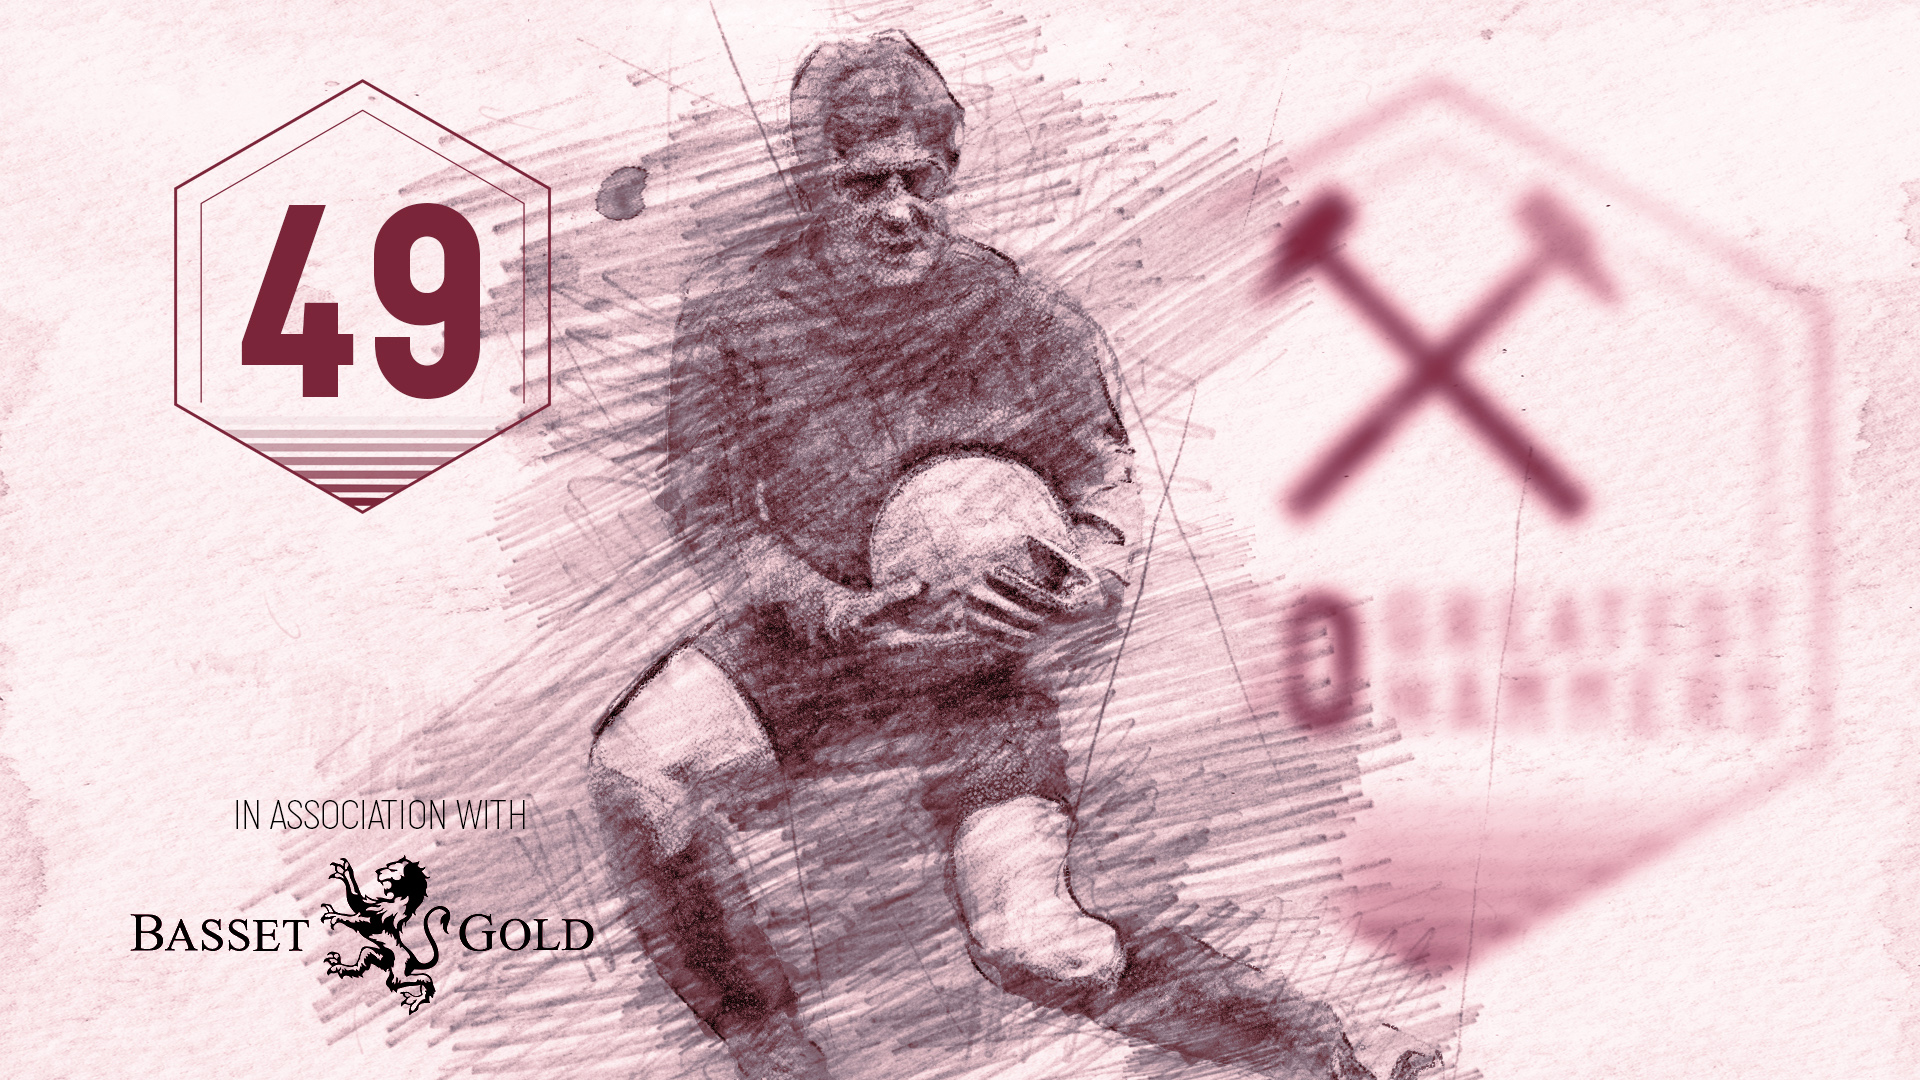 Ted Hufton is ranked number 49 in our 50 Greatest Hammers